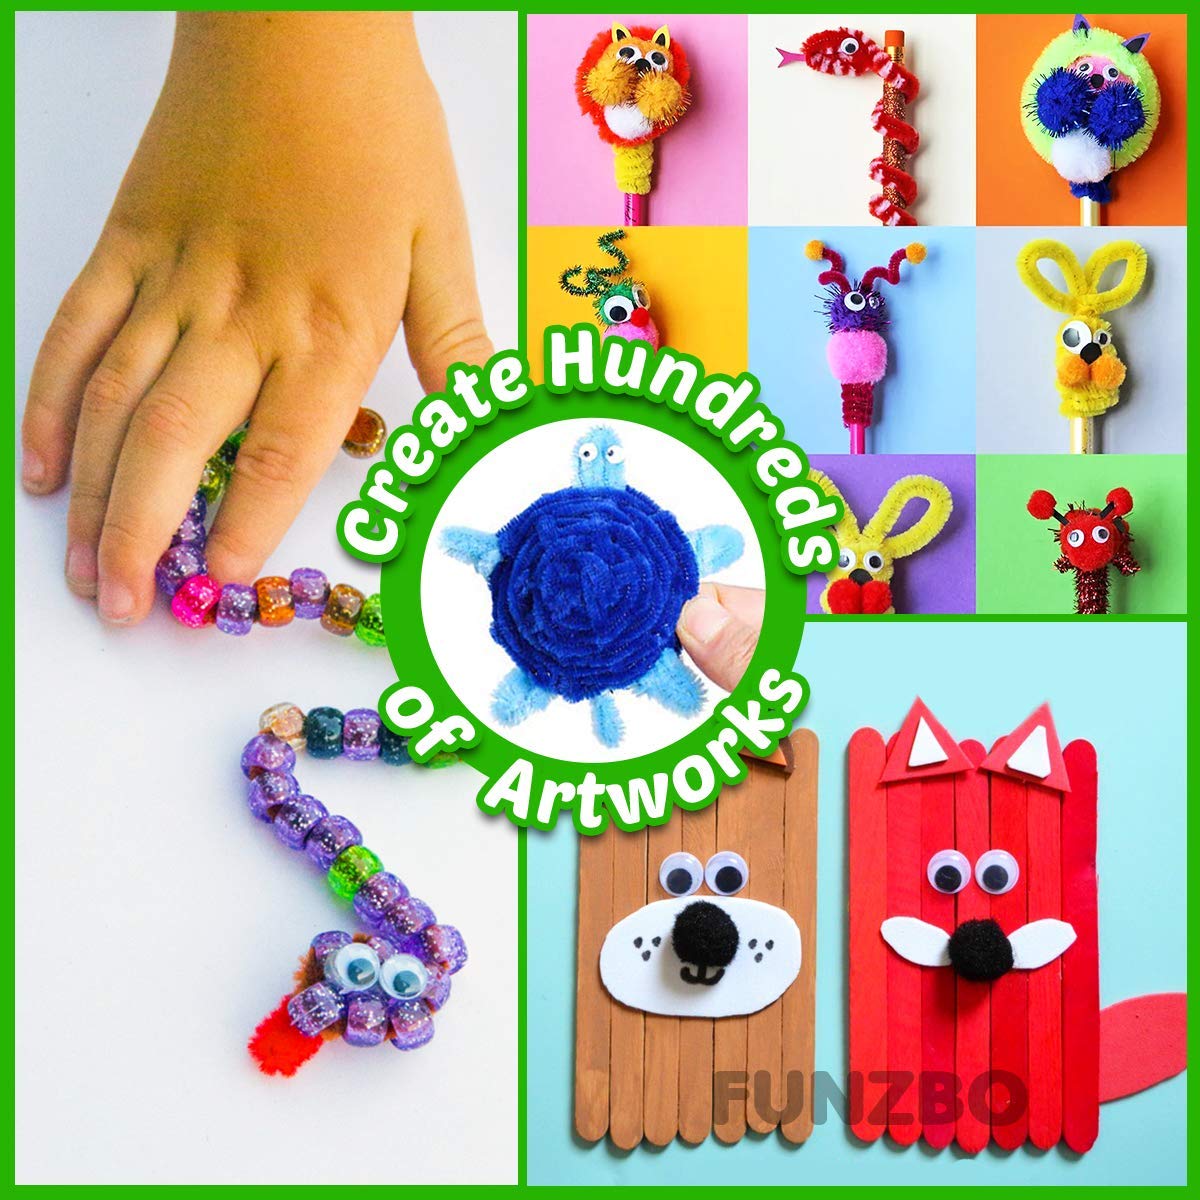 FUNZBO Arts and Crafts Supplies for Kids - Craft Supplies, Craft Kits with Pipe Cleaners, Pom Poms for Crafts & Gloogly Eyes, Crafts for Kids Ages 4-8, 4-6, 8-12, Preschool Supplies